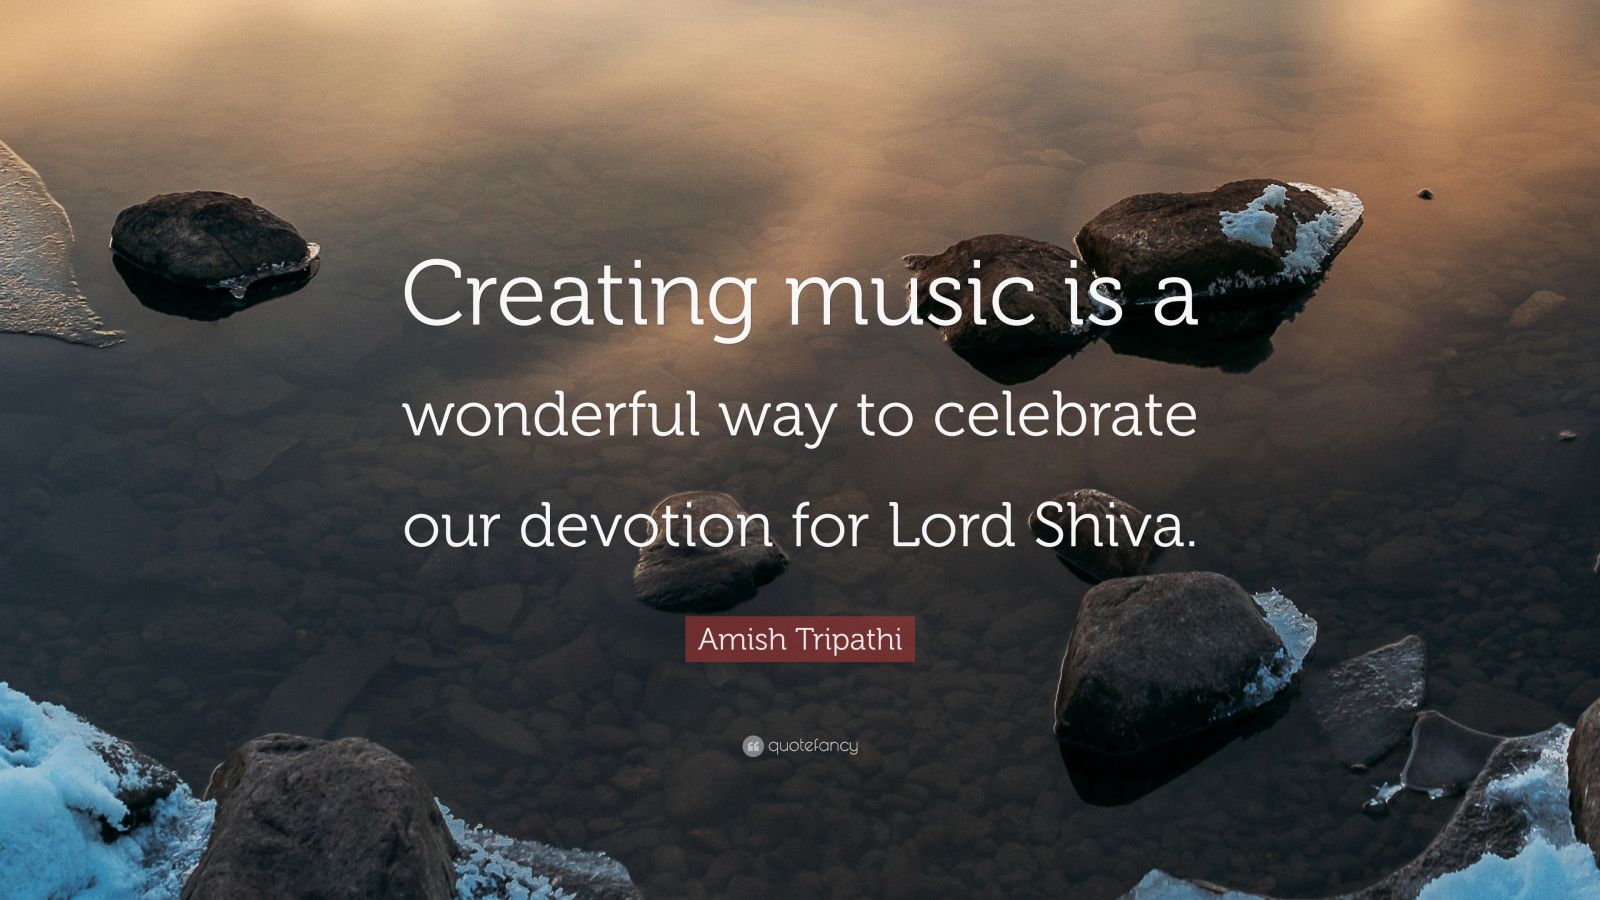 Amish Tripathi Quote: “Creating music is a wonderful way to ...